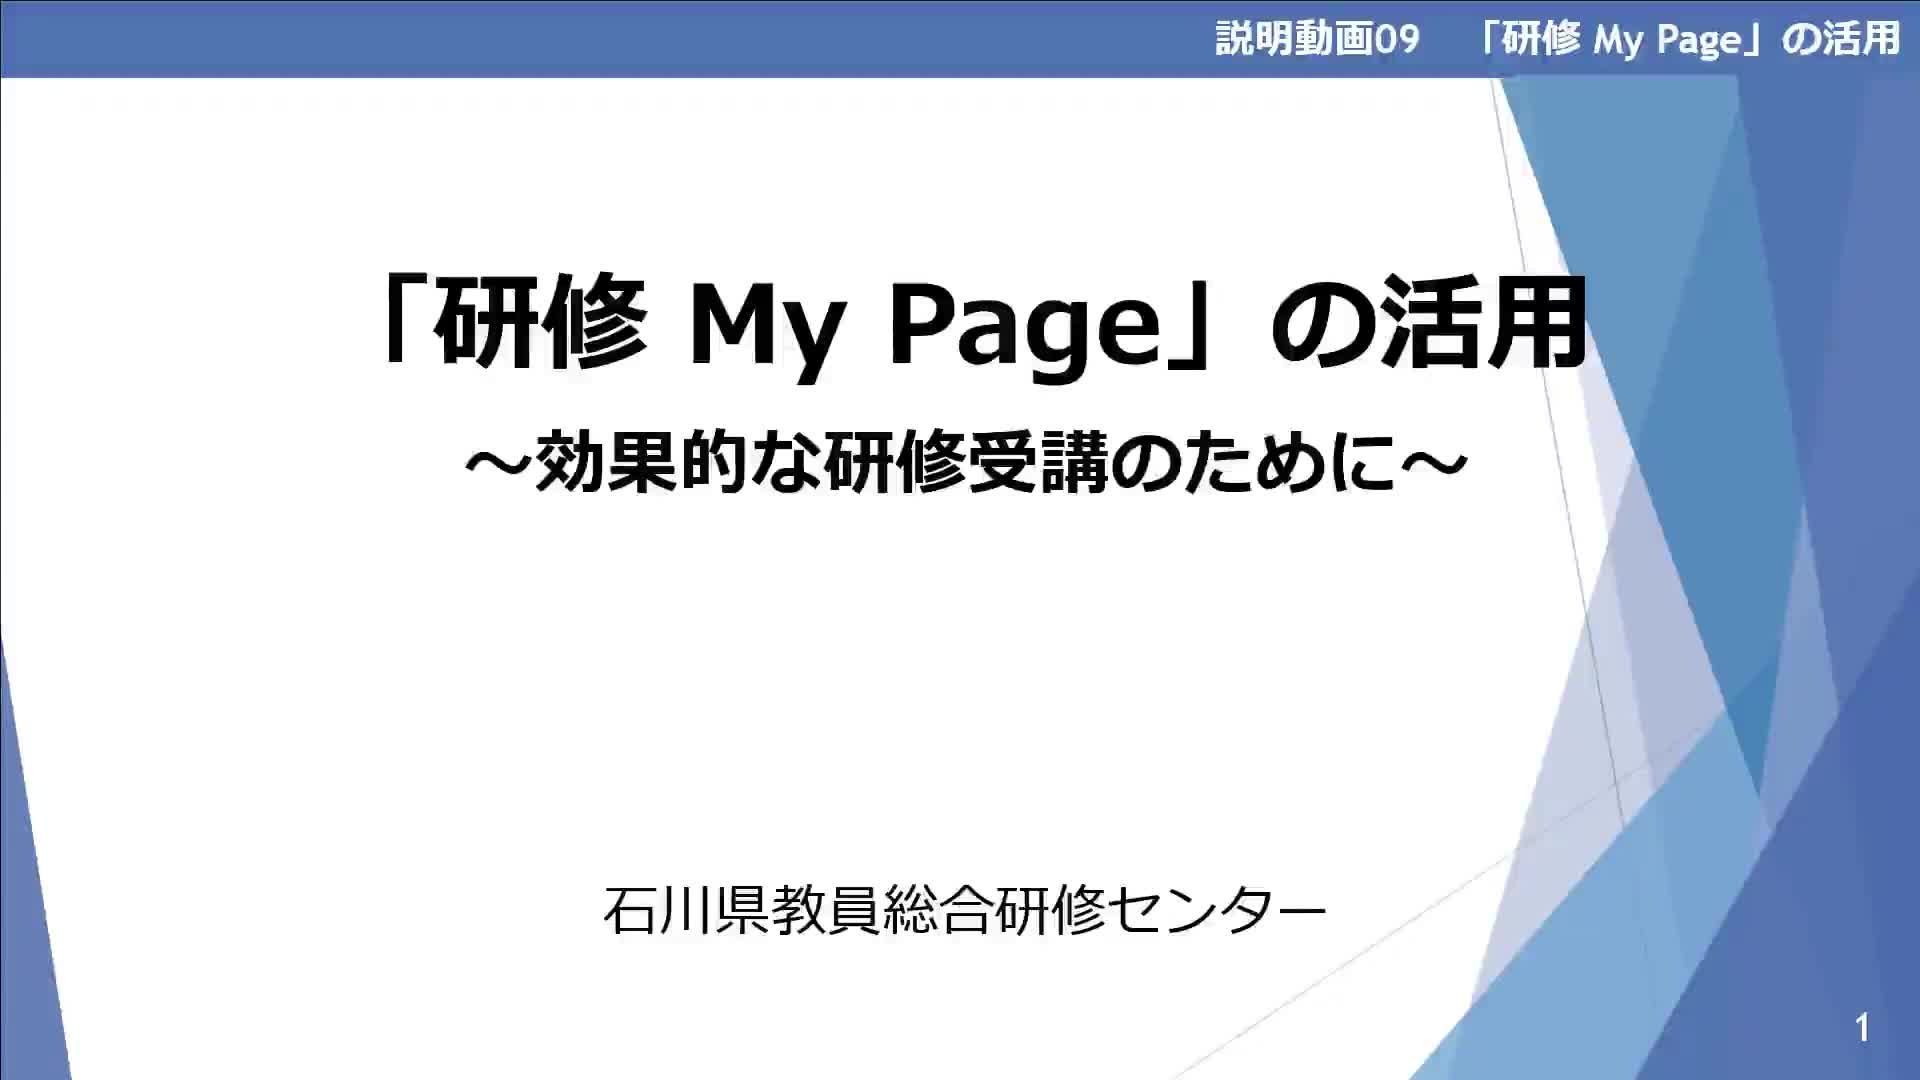 09_R4_【「研修 My Page」の活用～効果的な研修受講のために～】